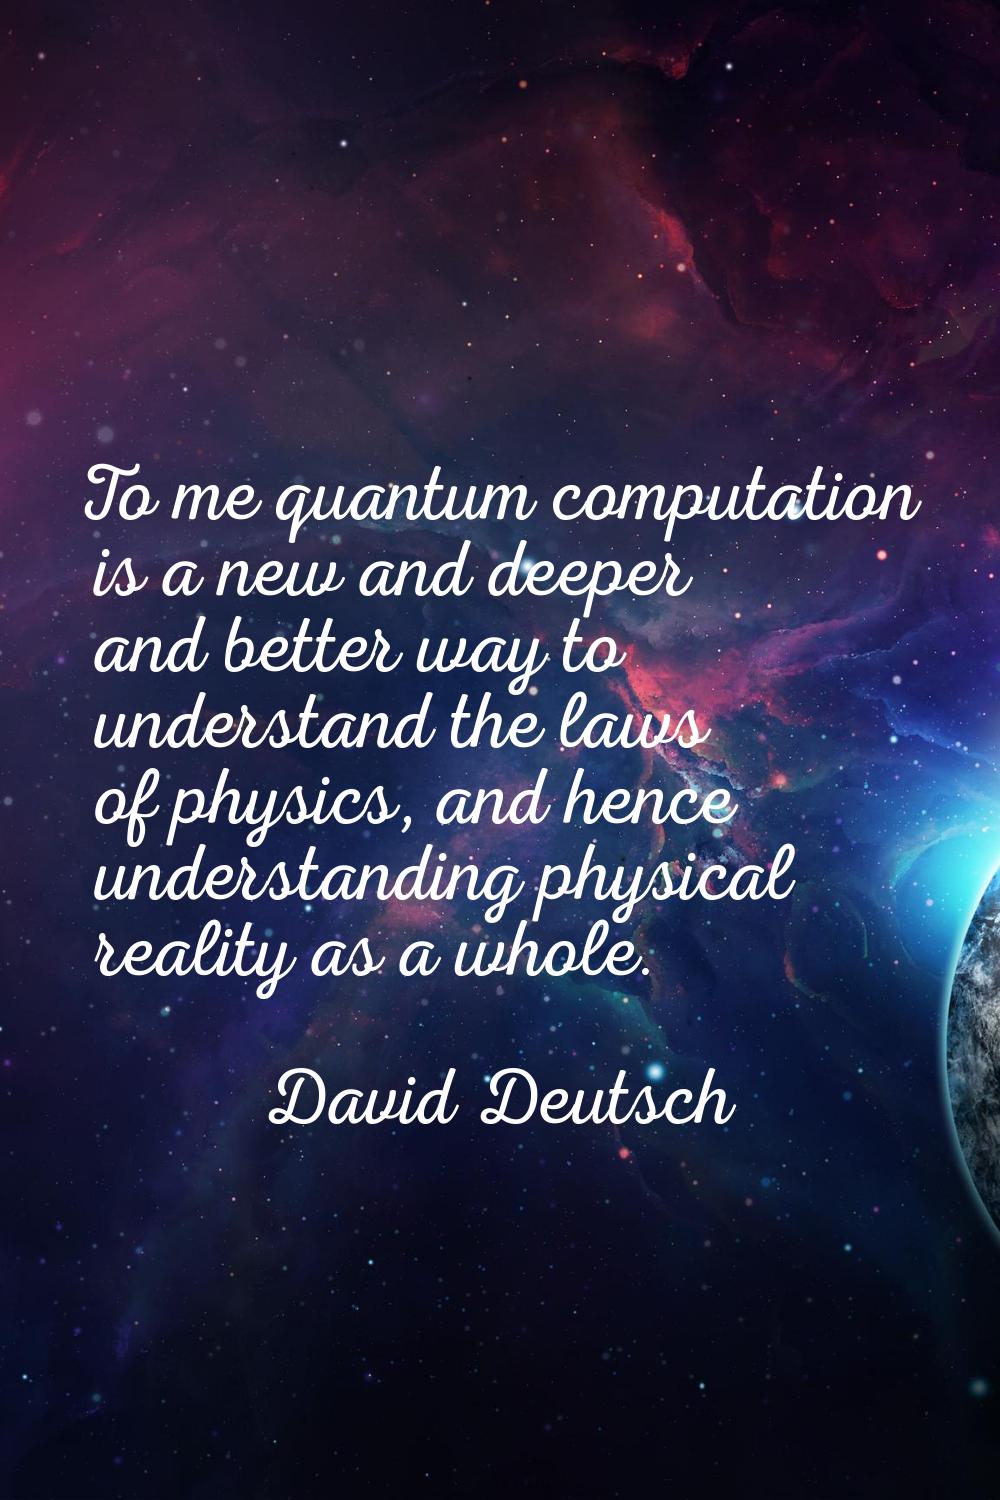 To me quantum computation is a new and deeper and better way to understand the laws of physics, and